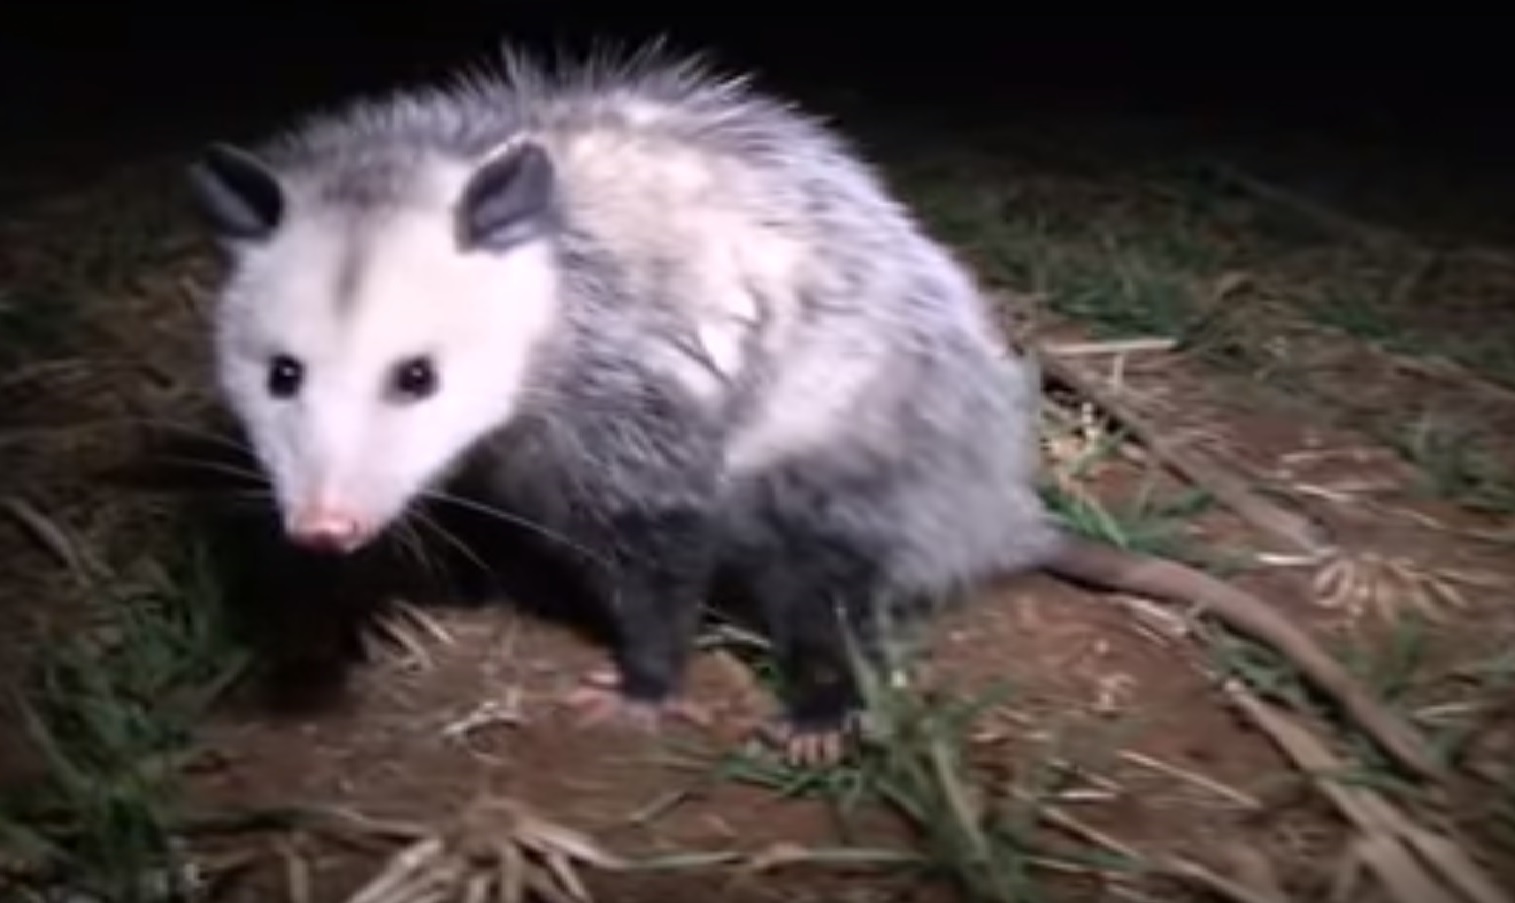 The Virginia Opossum is now found in Canada, Possum on the grass